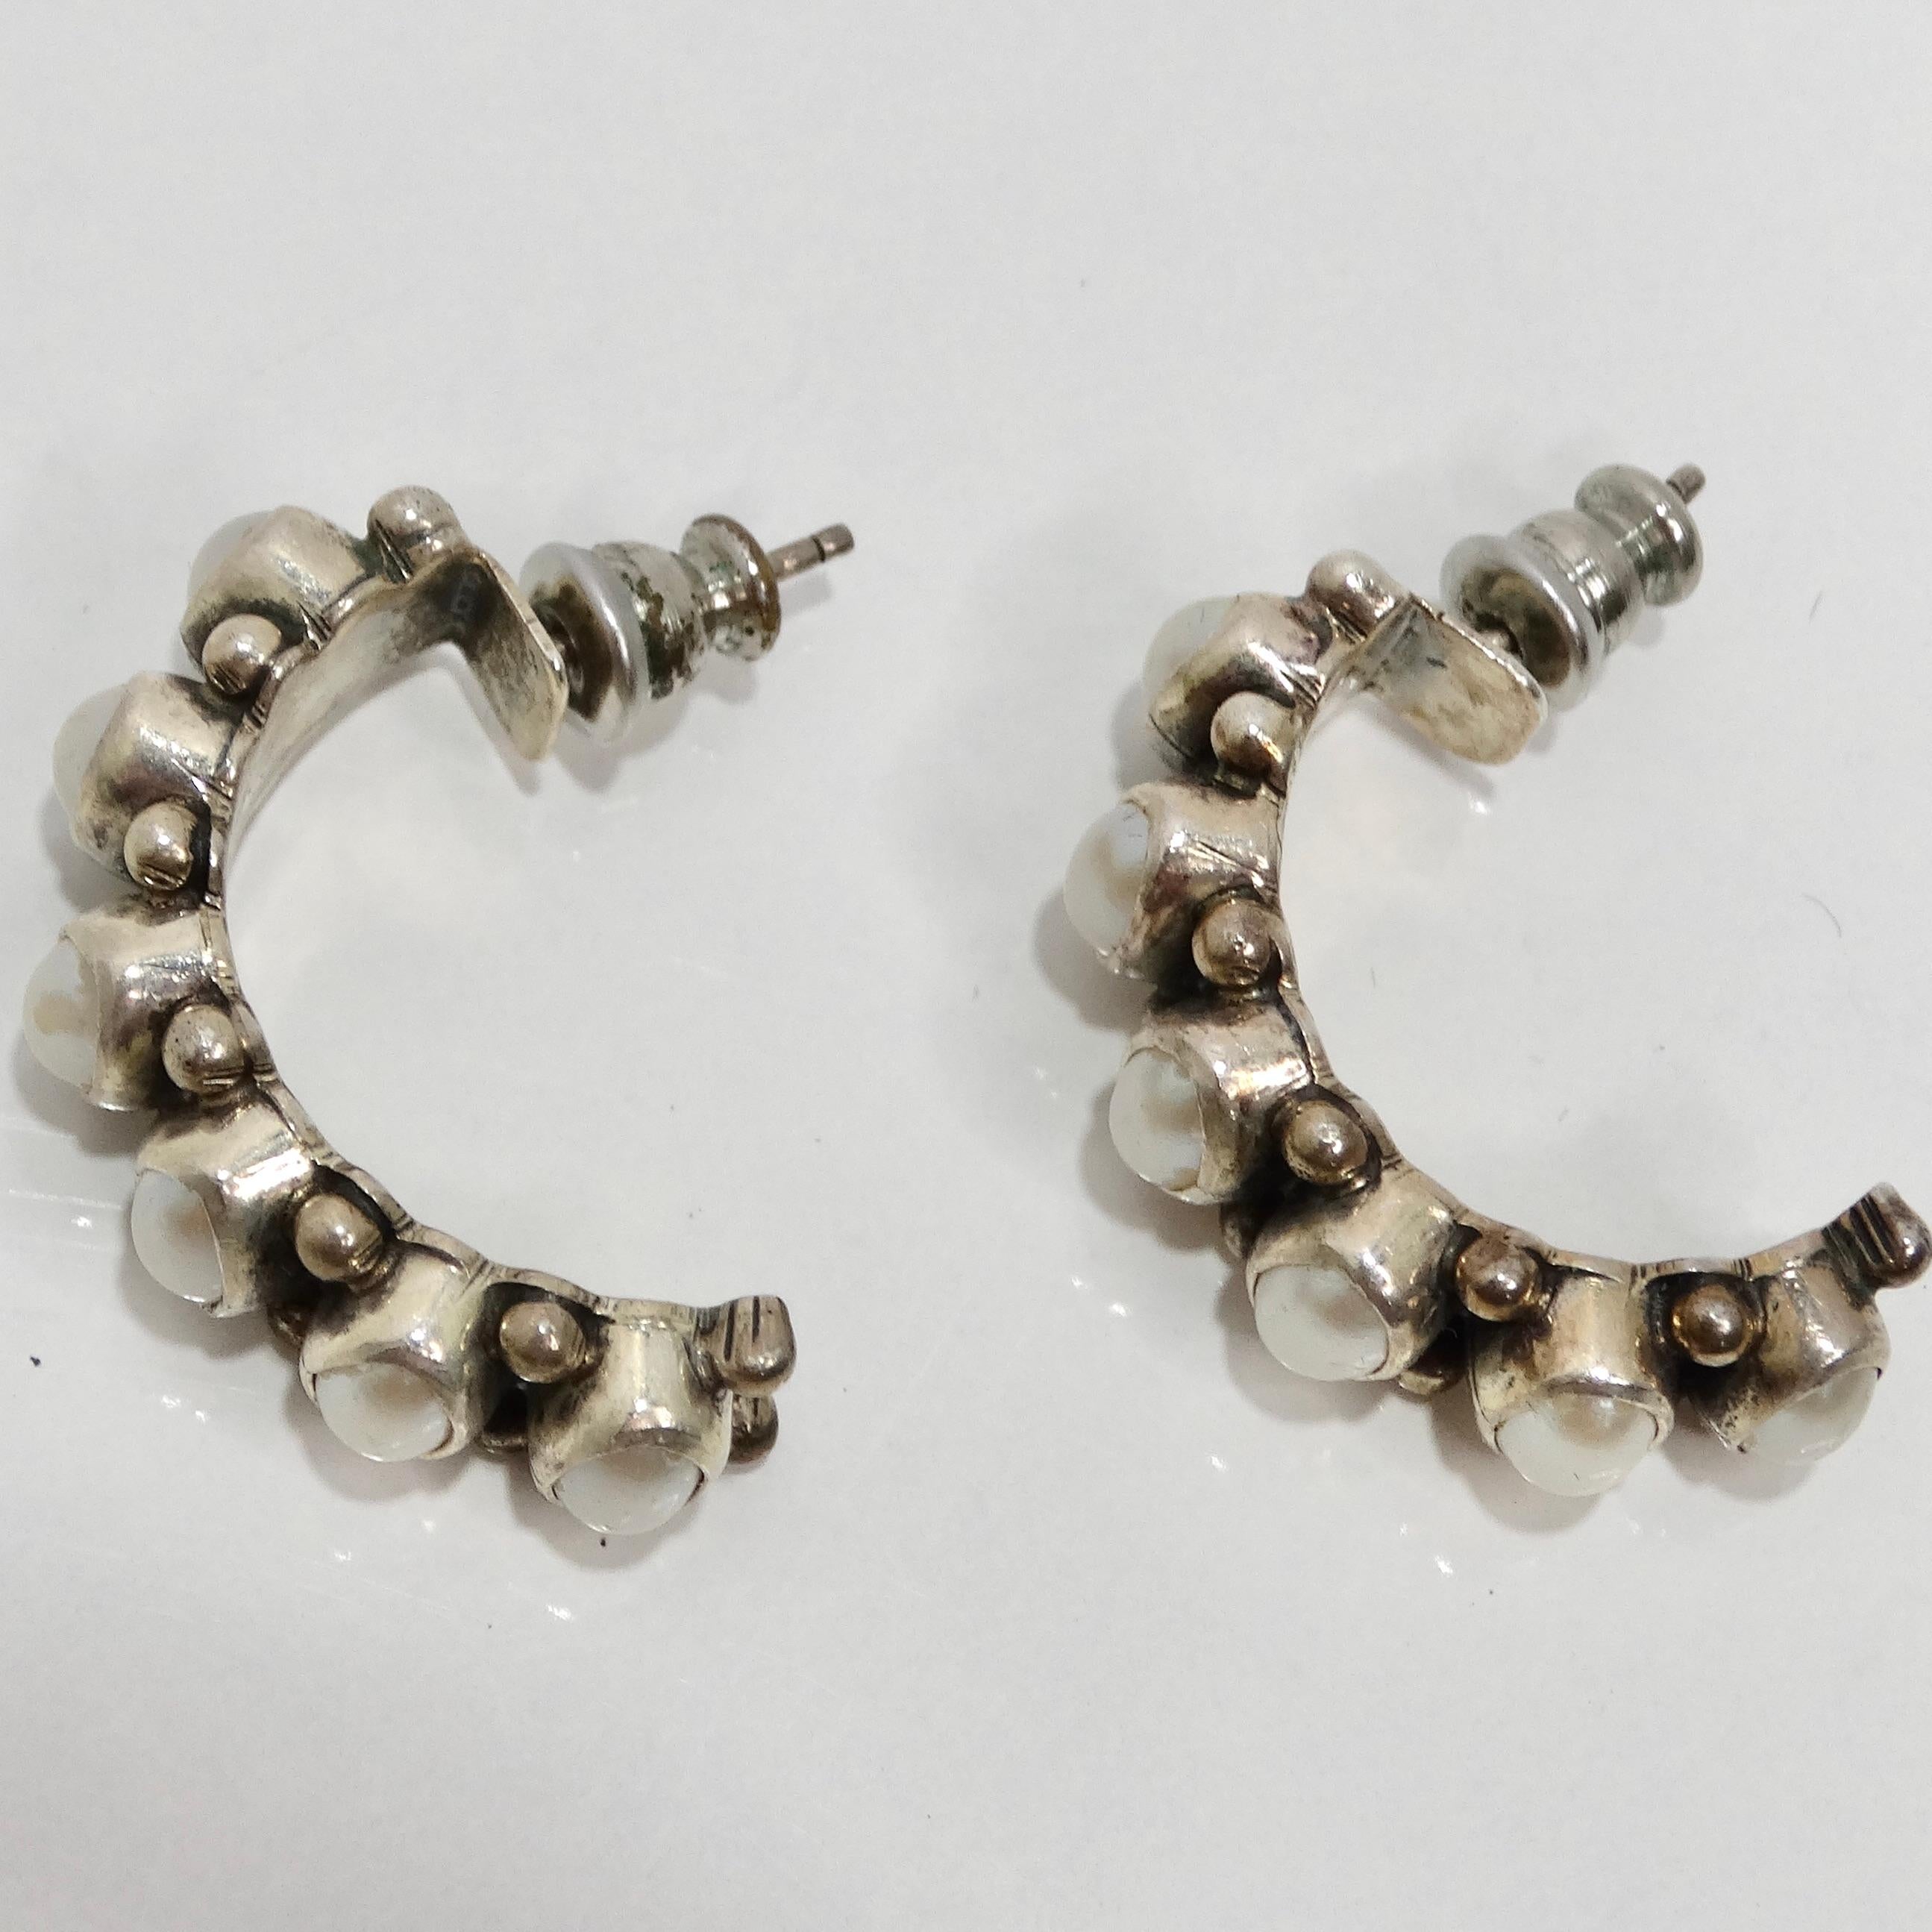 Elevate your style with the 1960s Sterling Silver Pearl Hoop Earrings, a classic pair of crescent-shaped half hoop earrings that beautifully combine authentic oval pearls with luxurious sterling silver. These earrings epitomize classic elegance. The